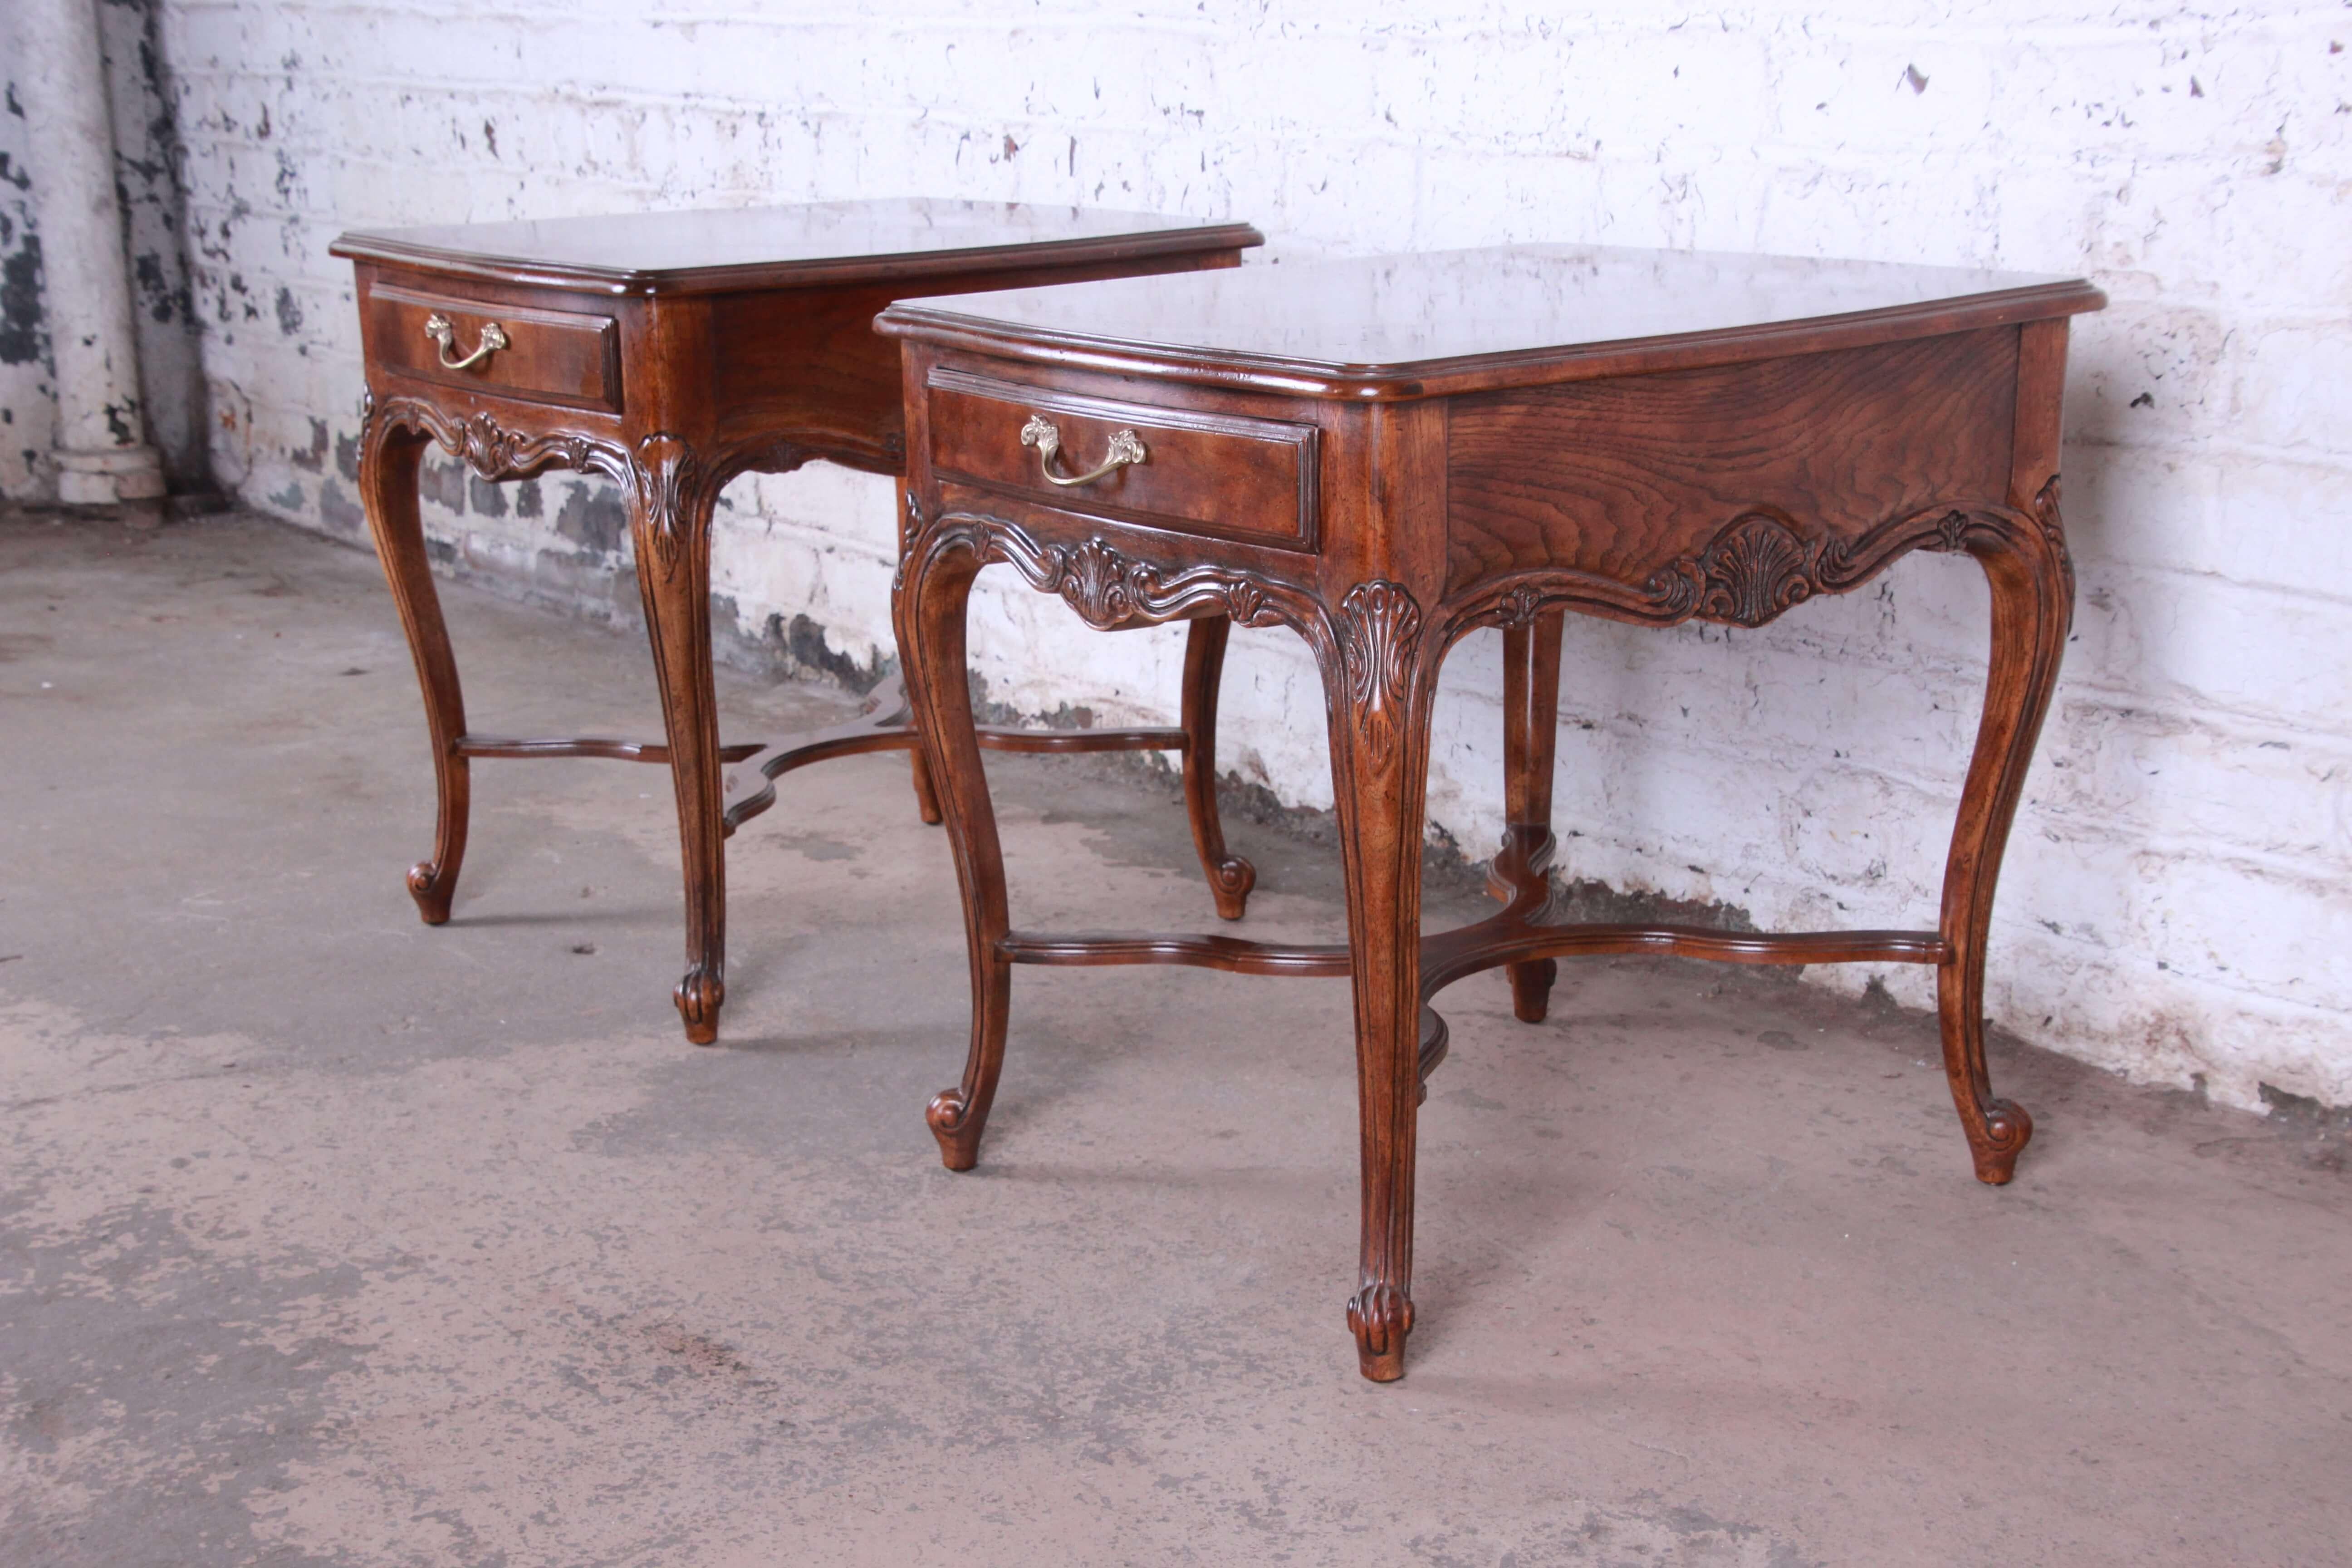 Offering a nice pair of Drexel Heritage French parquetry end table. The walnut tables have nice brass hardware with each table have a smooth sliding drawer for storage. The top of the tables have a nice parquetry design and nice French details